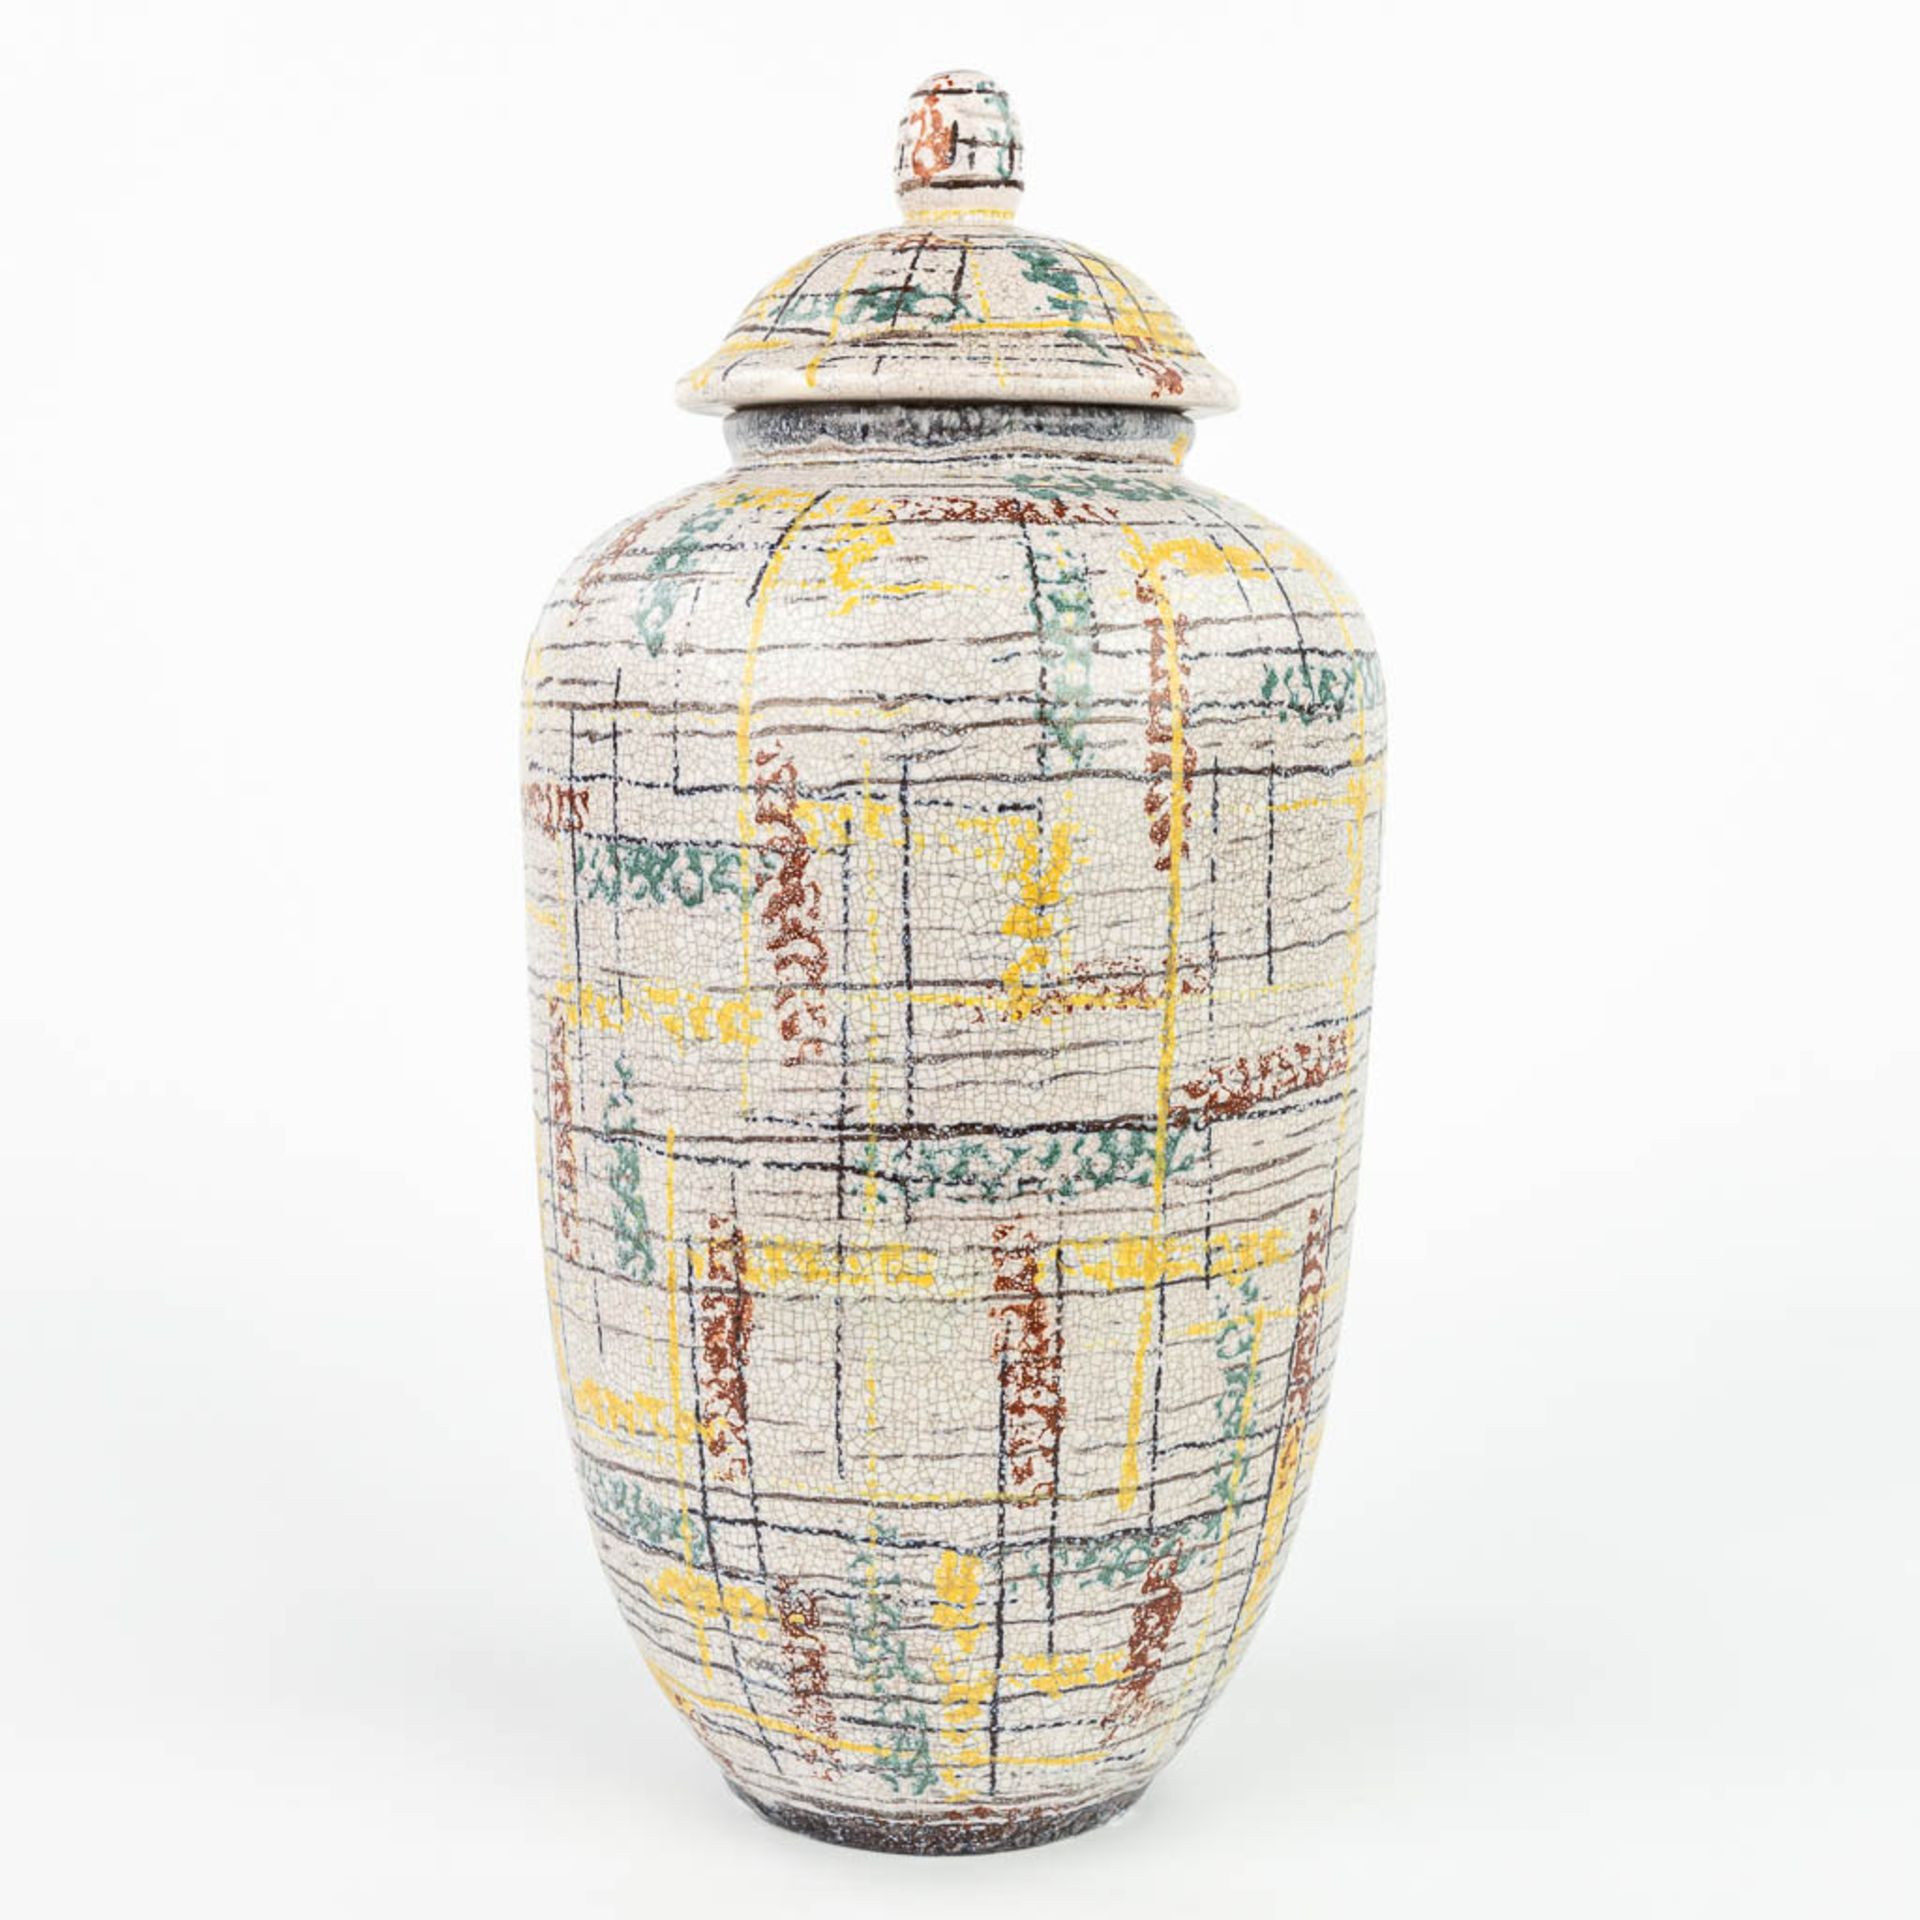 A vase with lid and made of glazed ceramics, marked U Keramik, made in Germany. (H:38cm) - Image 11 of 22